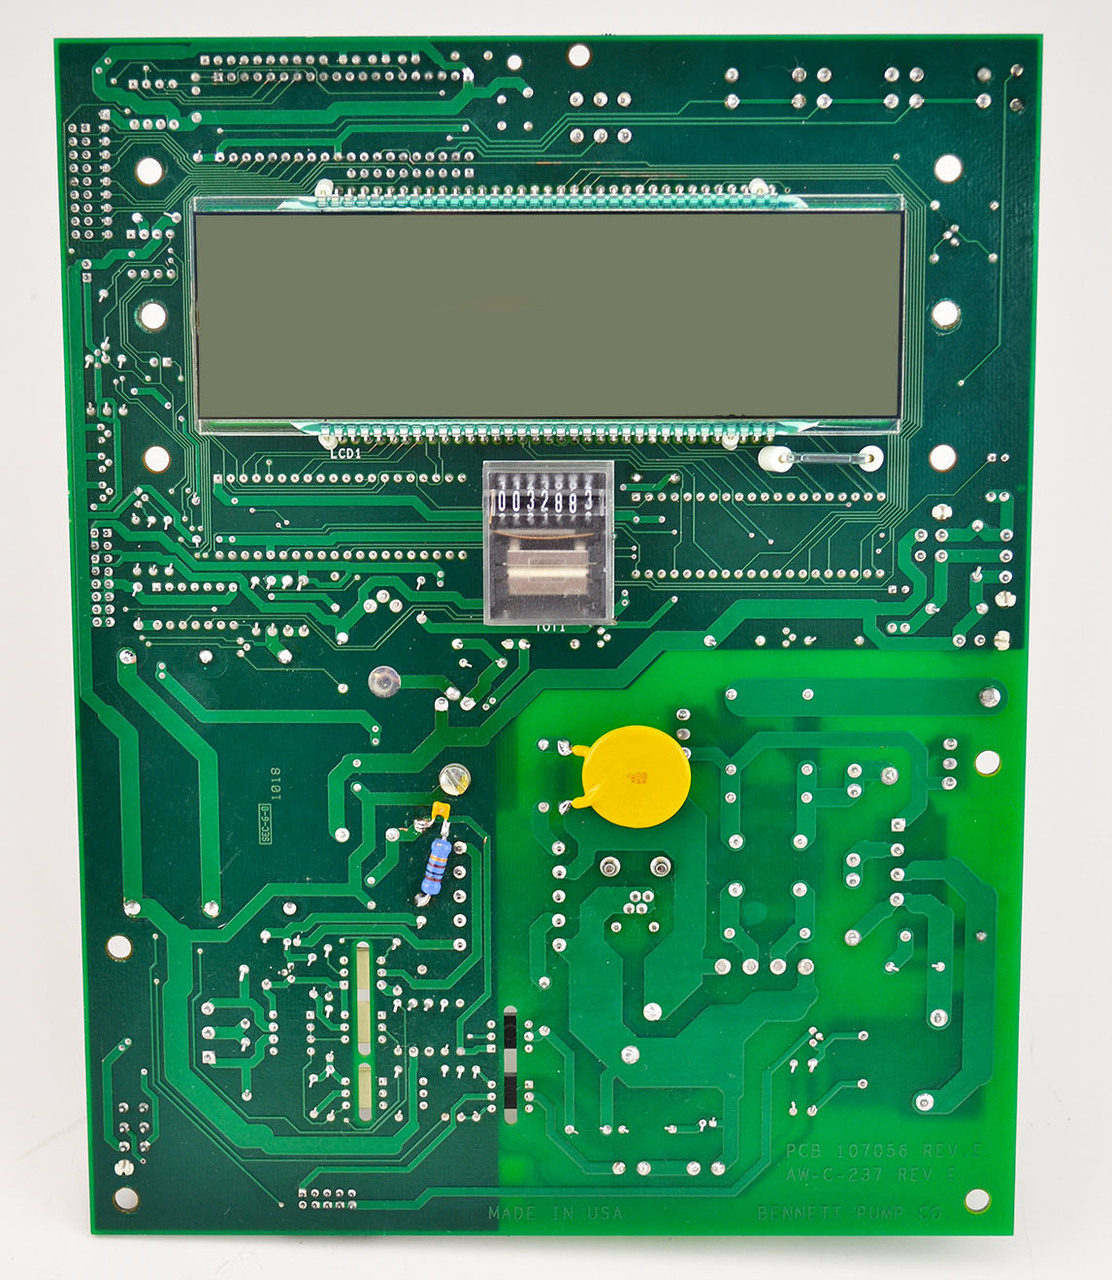 210 COMMERCIAL CPU BOARD, Fits Bennett Image